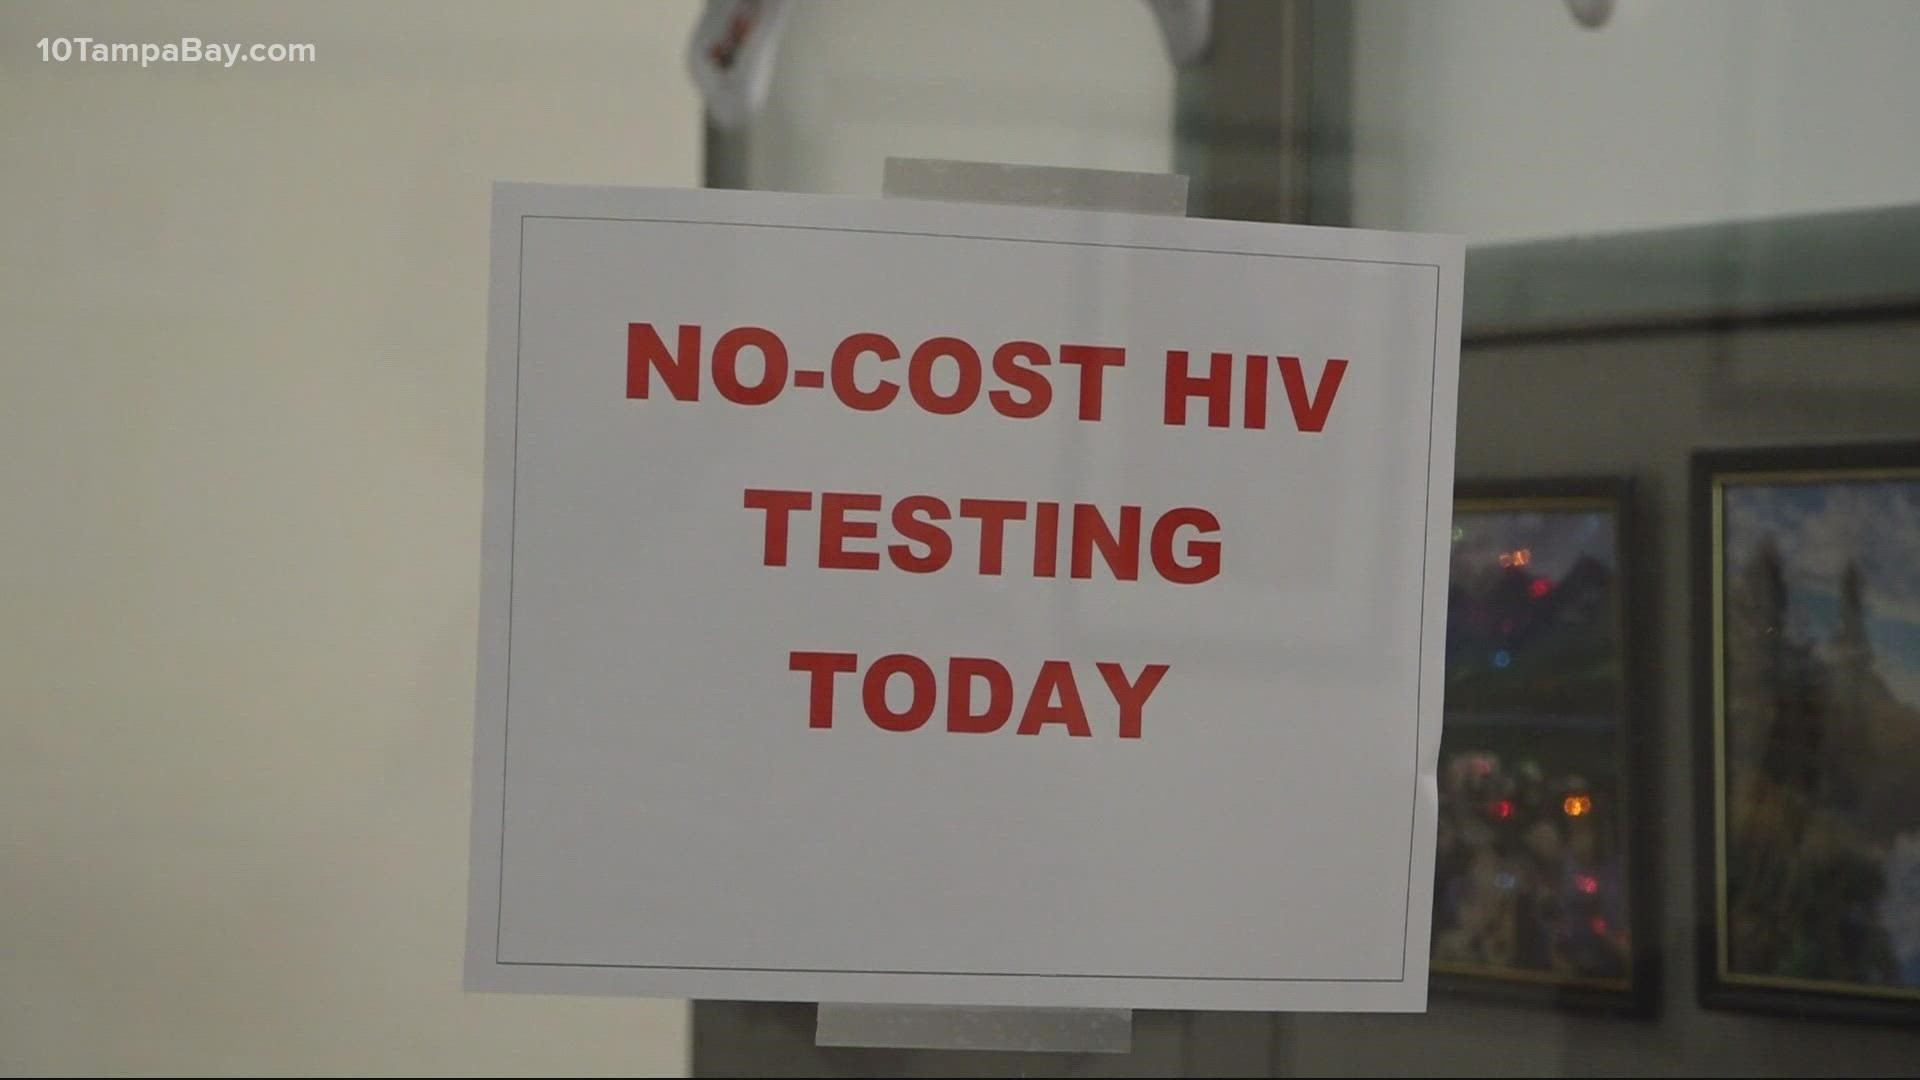 At health departments around Tampa Bay, free HIV tests and screenings were being offered Wednesday.